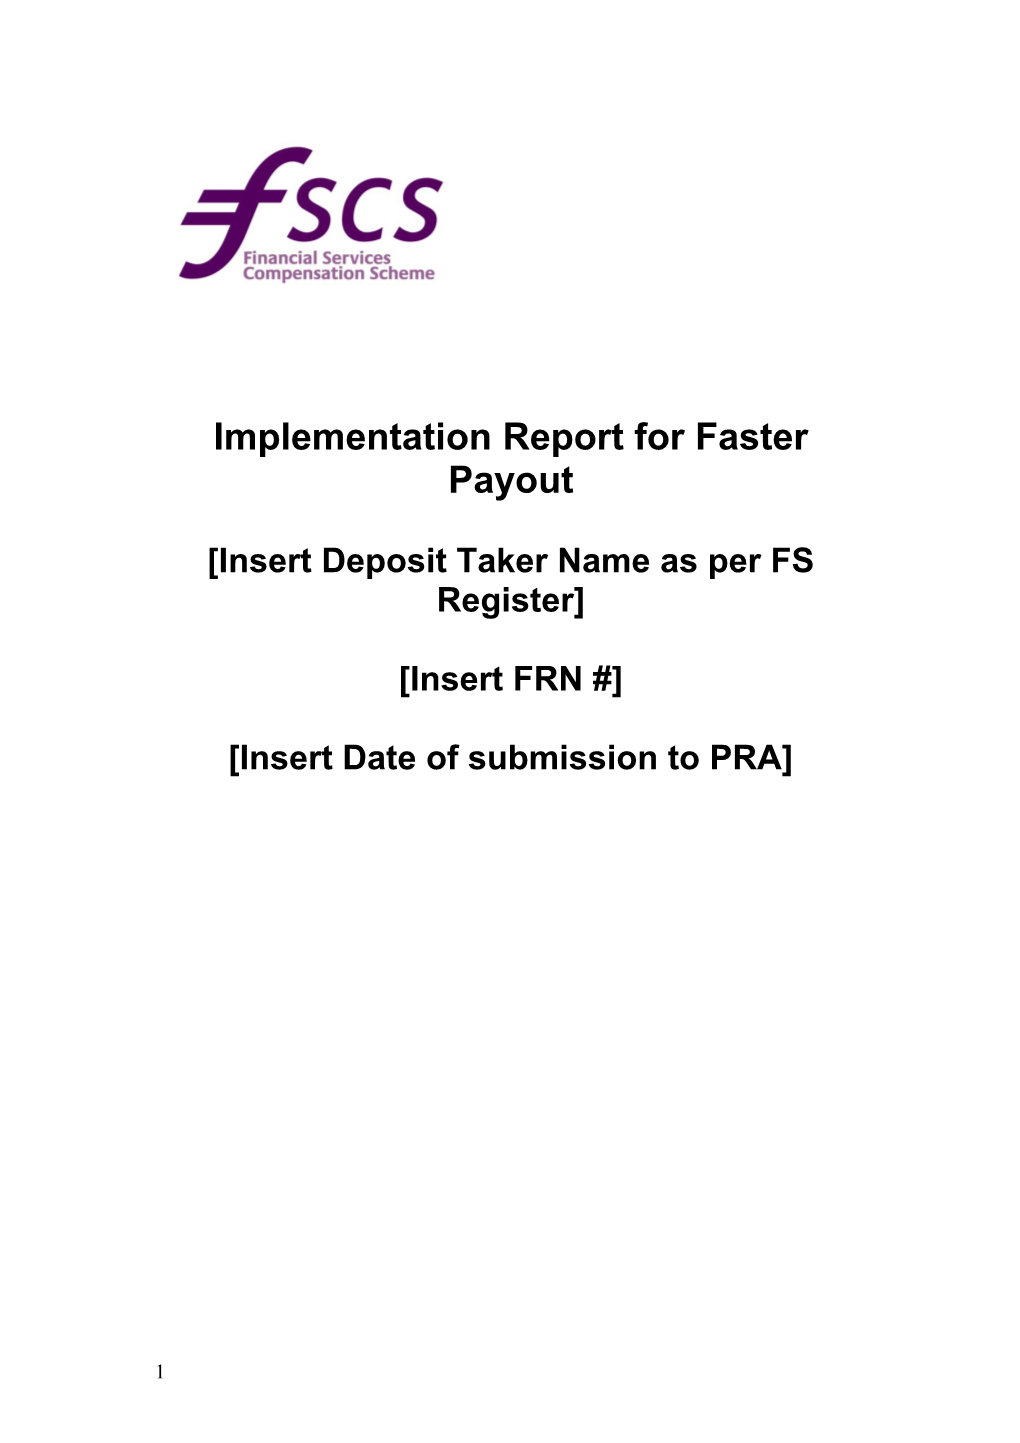 Implementation Report for Faster Payout